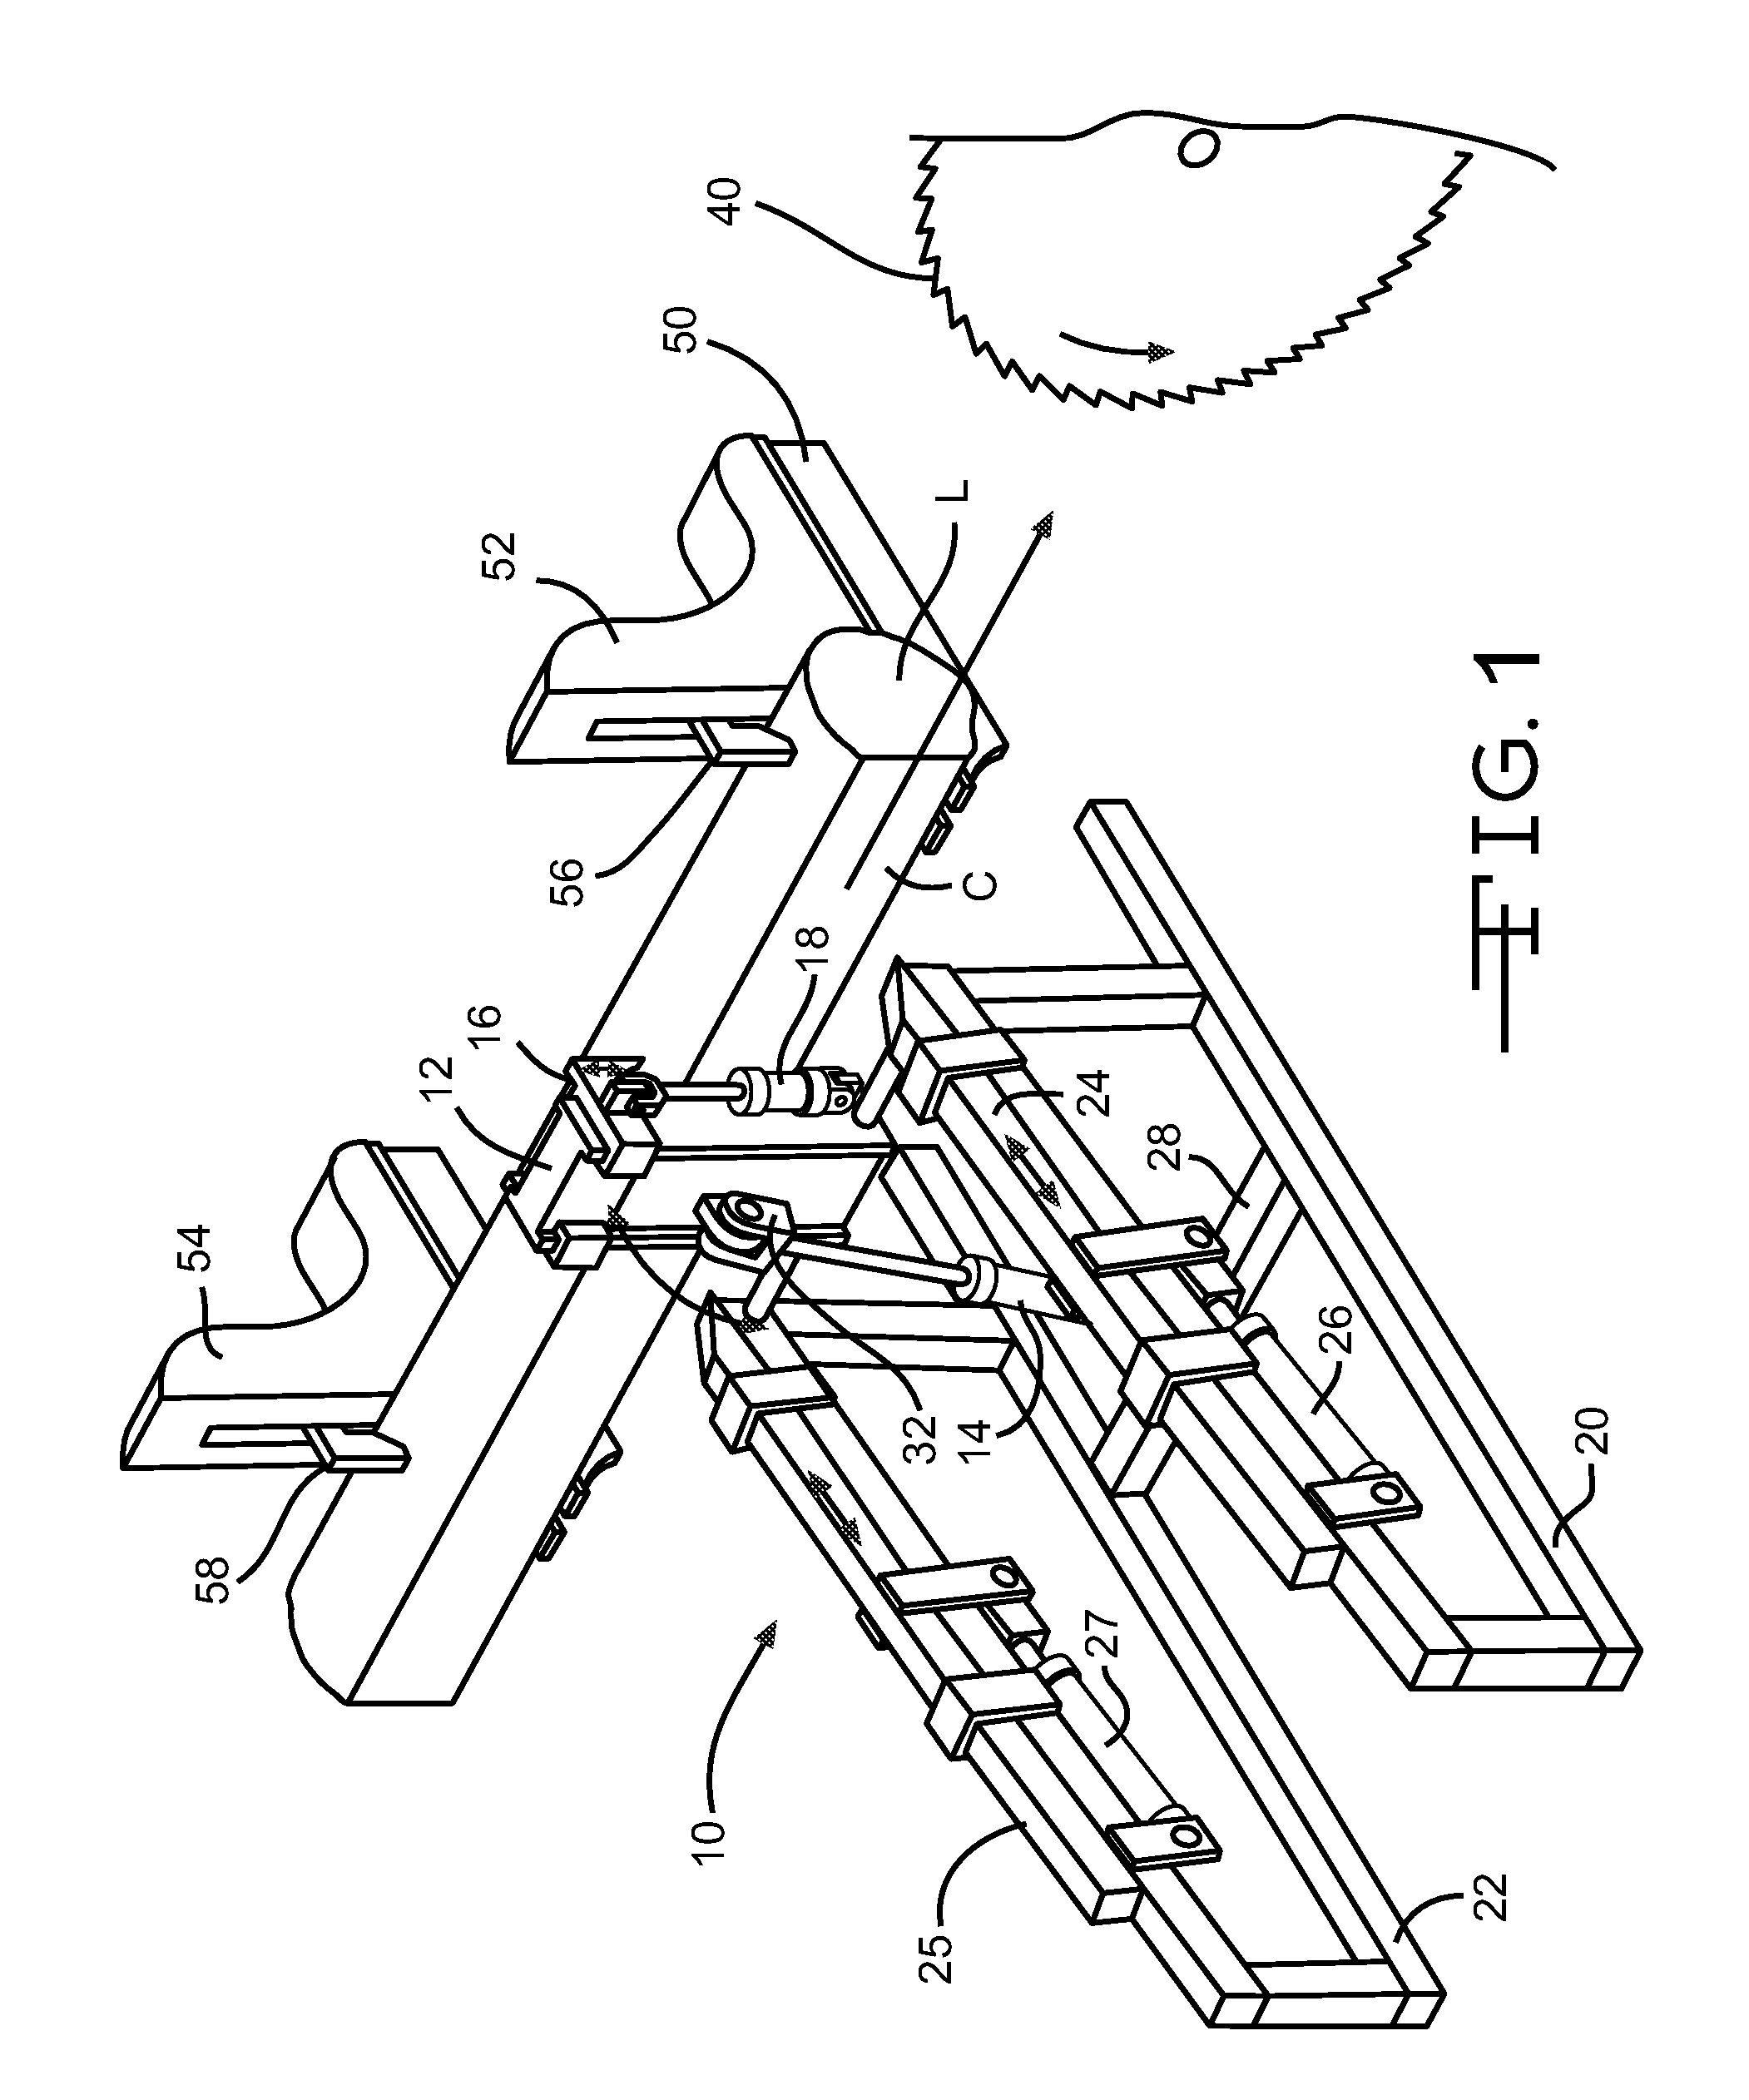 Method and Apparatus for Turning a Log for Processing in a Sawmill